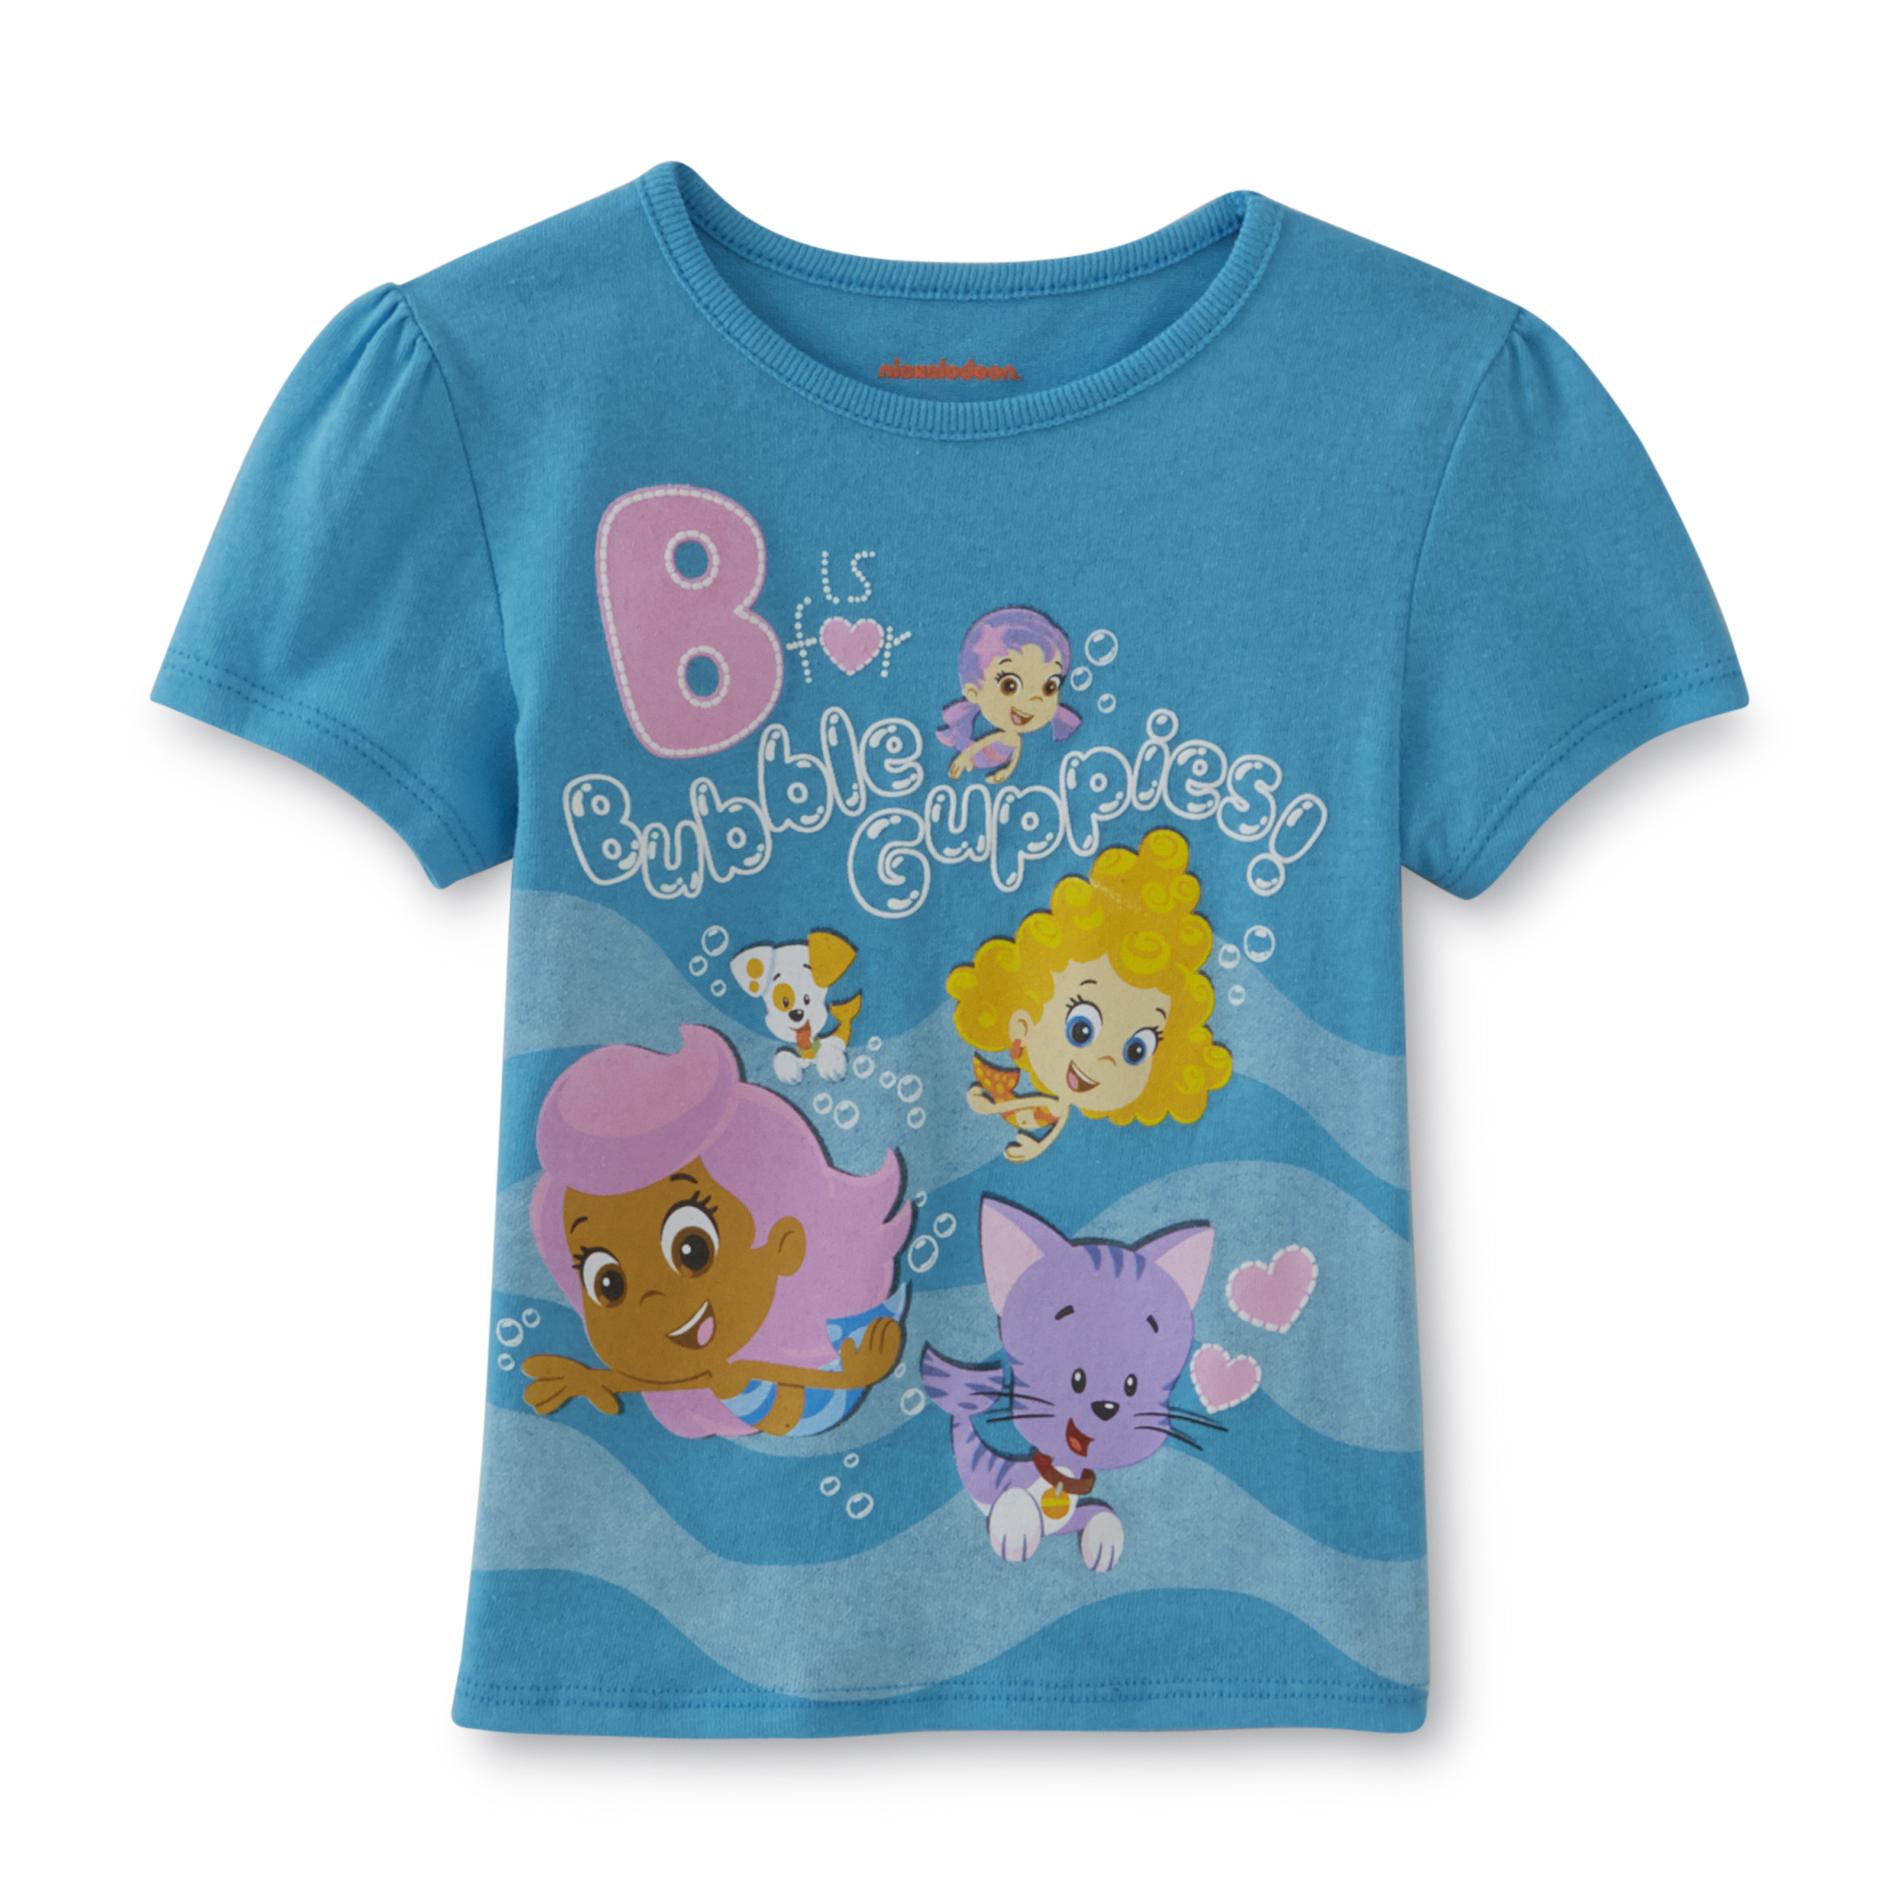 Nickelodeon Bubble Guppies Toddler Girl's Graphic T-Shirt